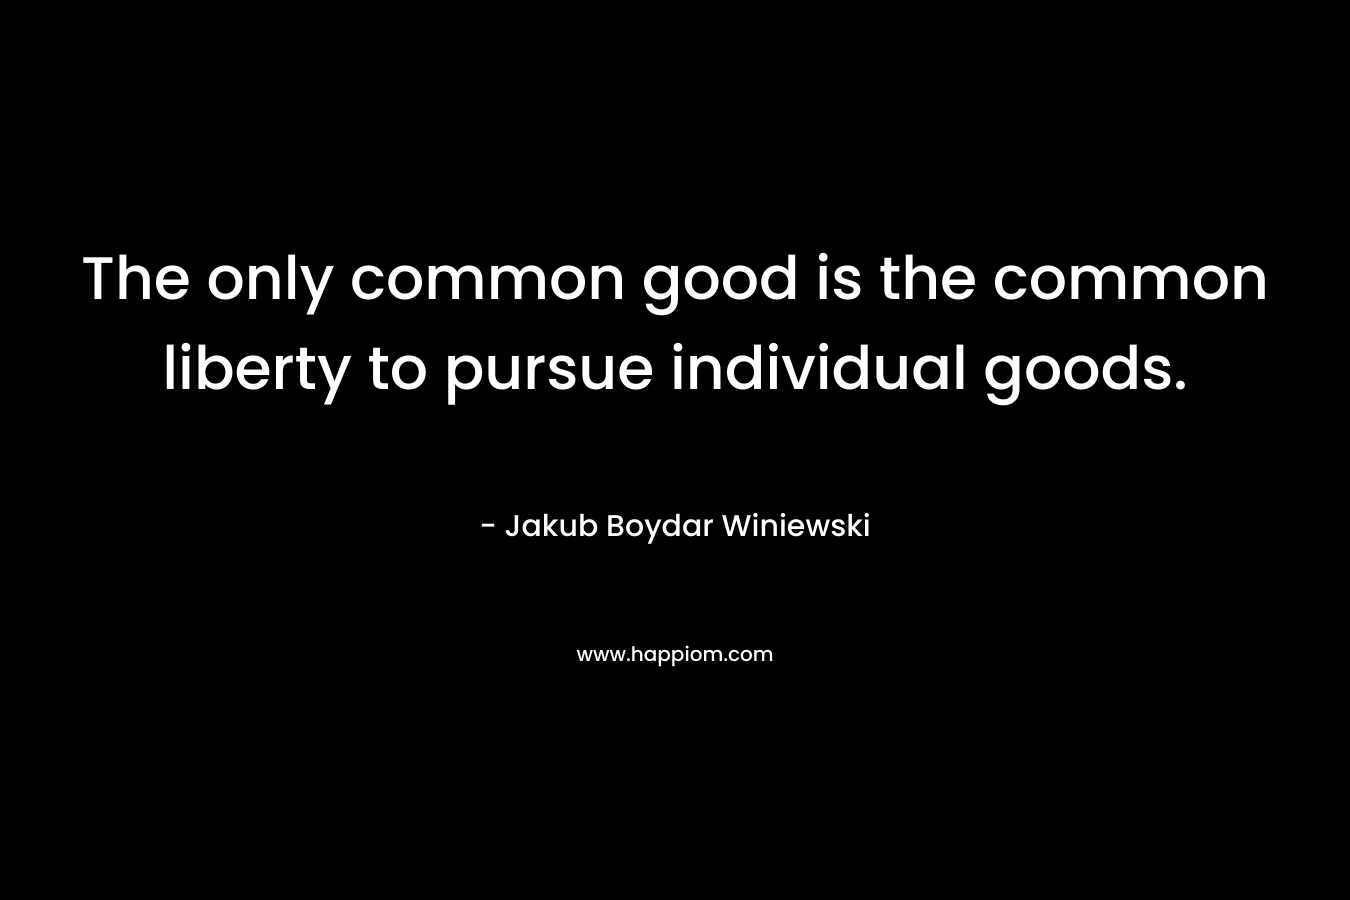 The only common good is the common liberty to pursue individual goods. – Jakub Boydar Winiewski